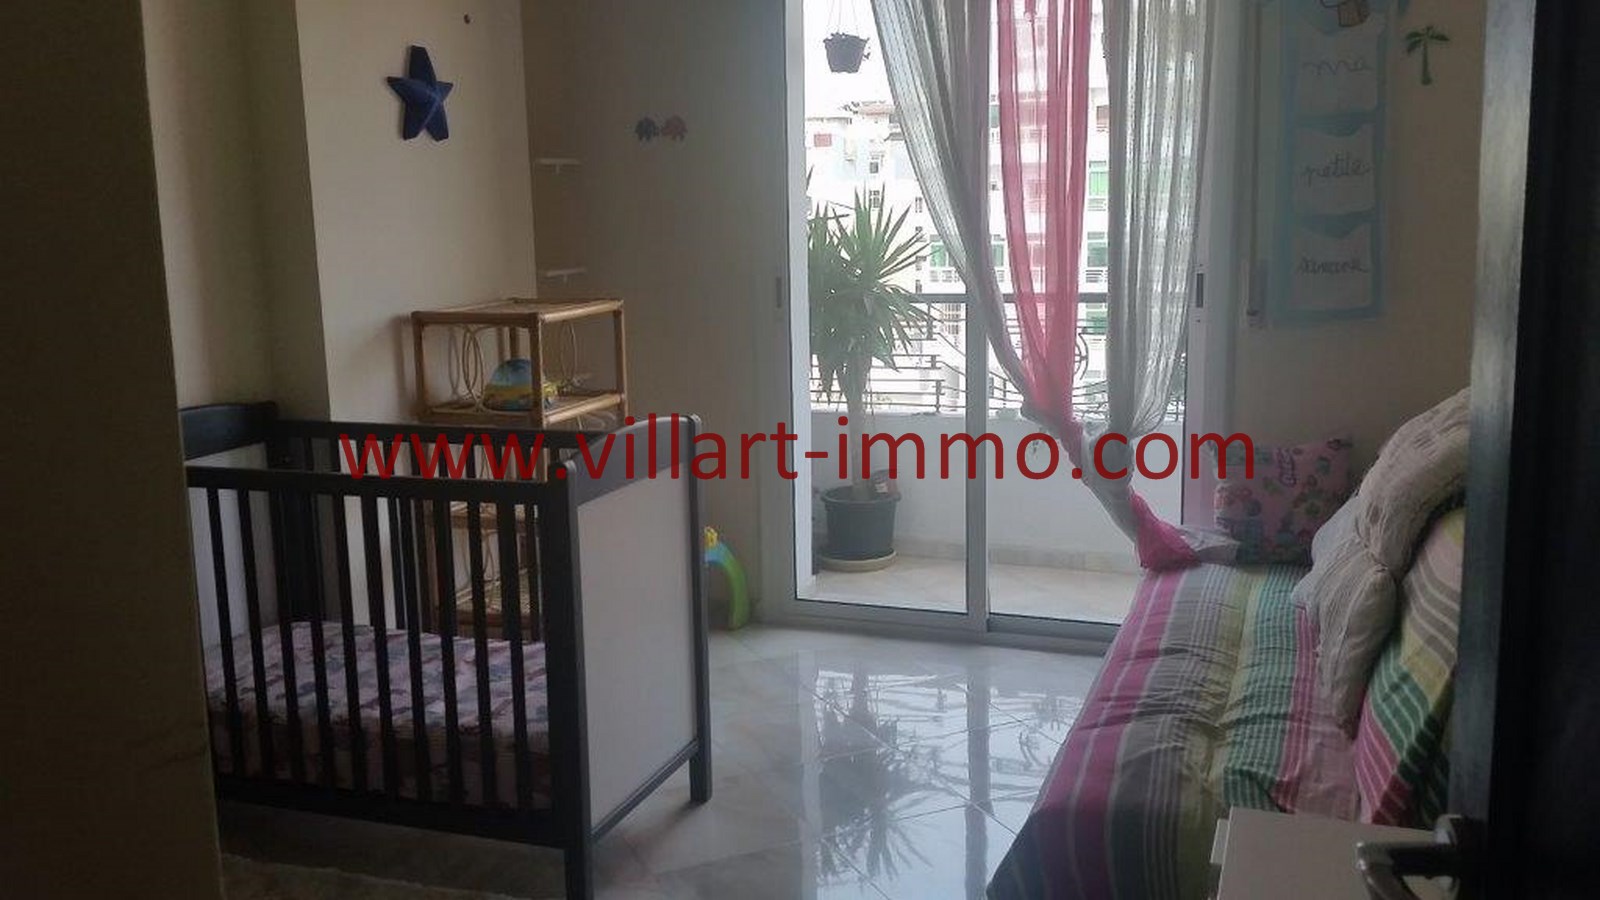 9-location-appartement-meuble-tanger-chambre-3-l856-villart-immo-agence-immobiliere